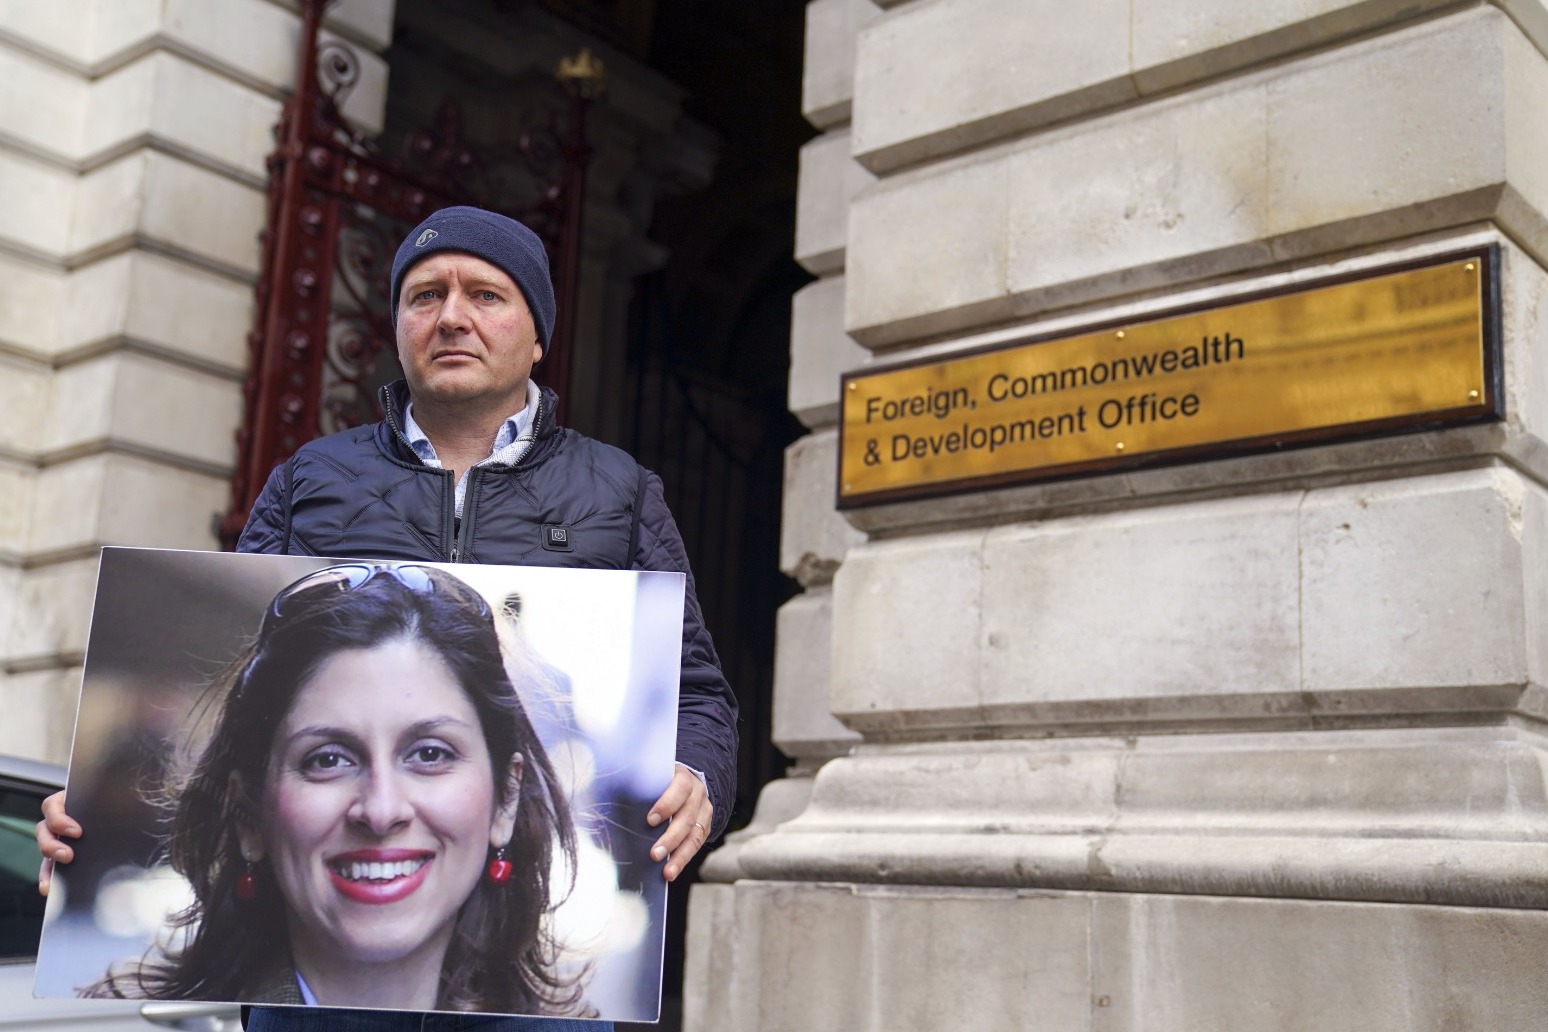 UK should press for release of Nazanin Zaghari-Ratcliffe at Cop26 – Amnesty 